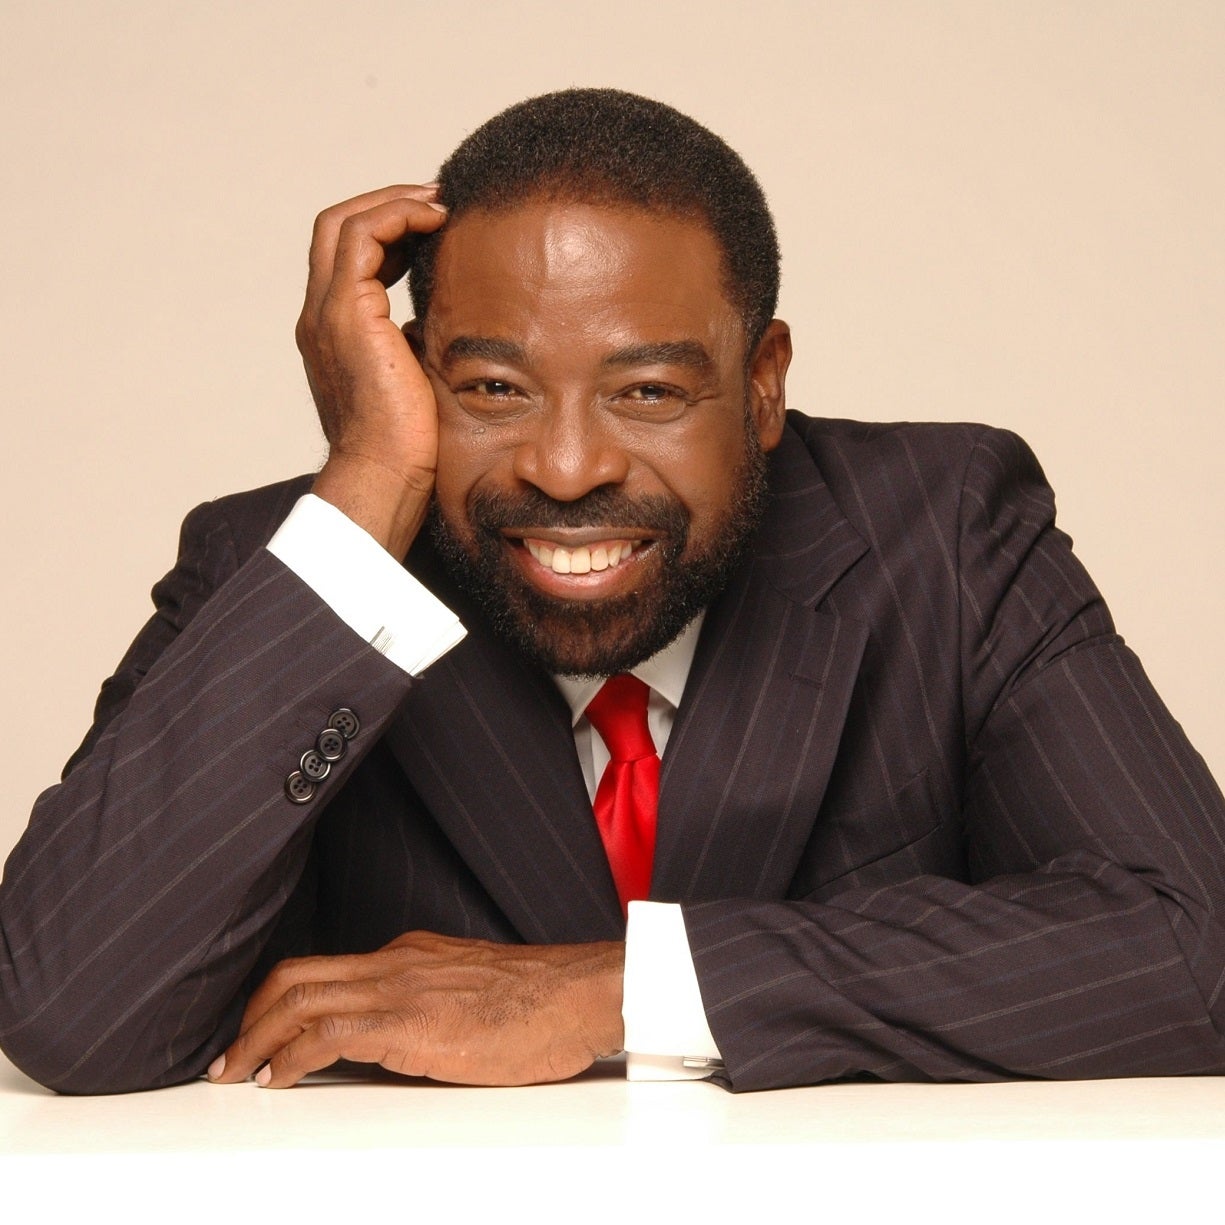 The 77-year old son of father (?) and mother(?) Les Brown in 2022 photo. Les Brown earned a  million dollar salary - leaving the net worth at  million in 2022